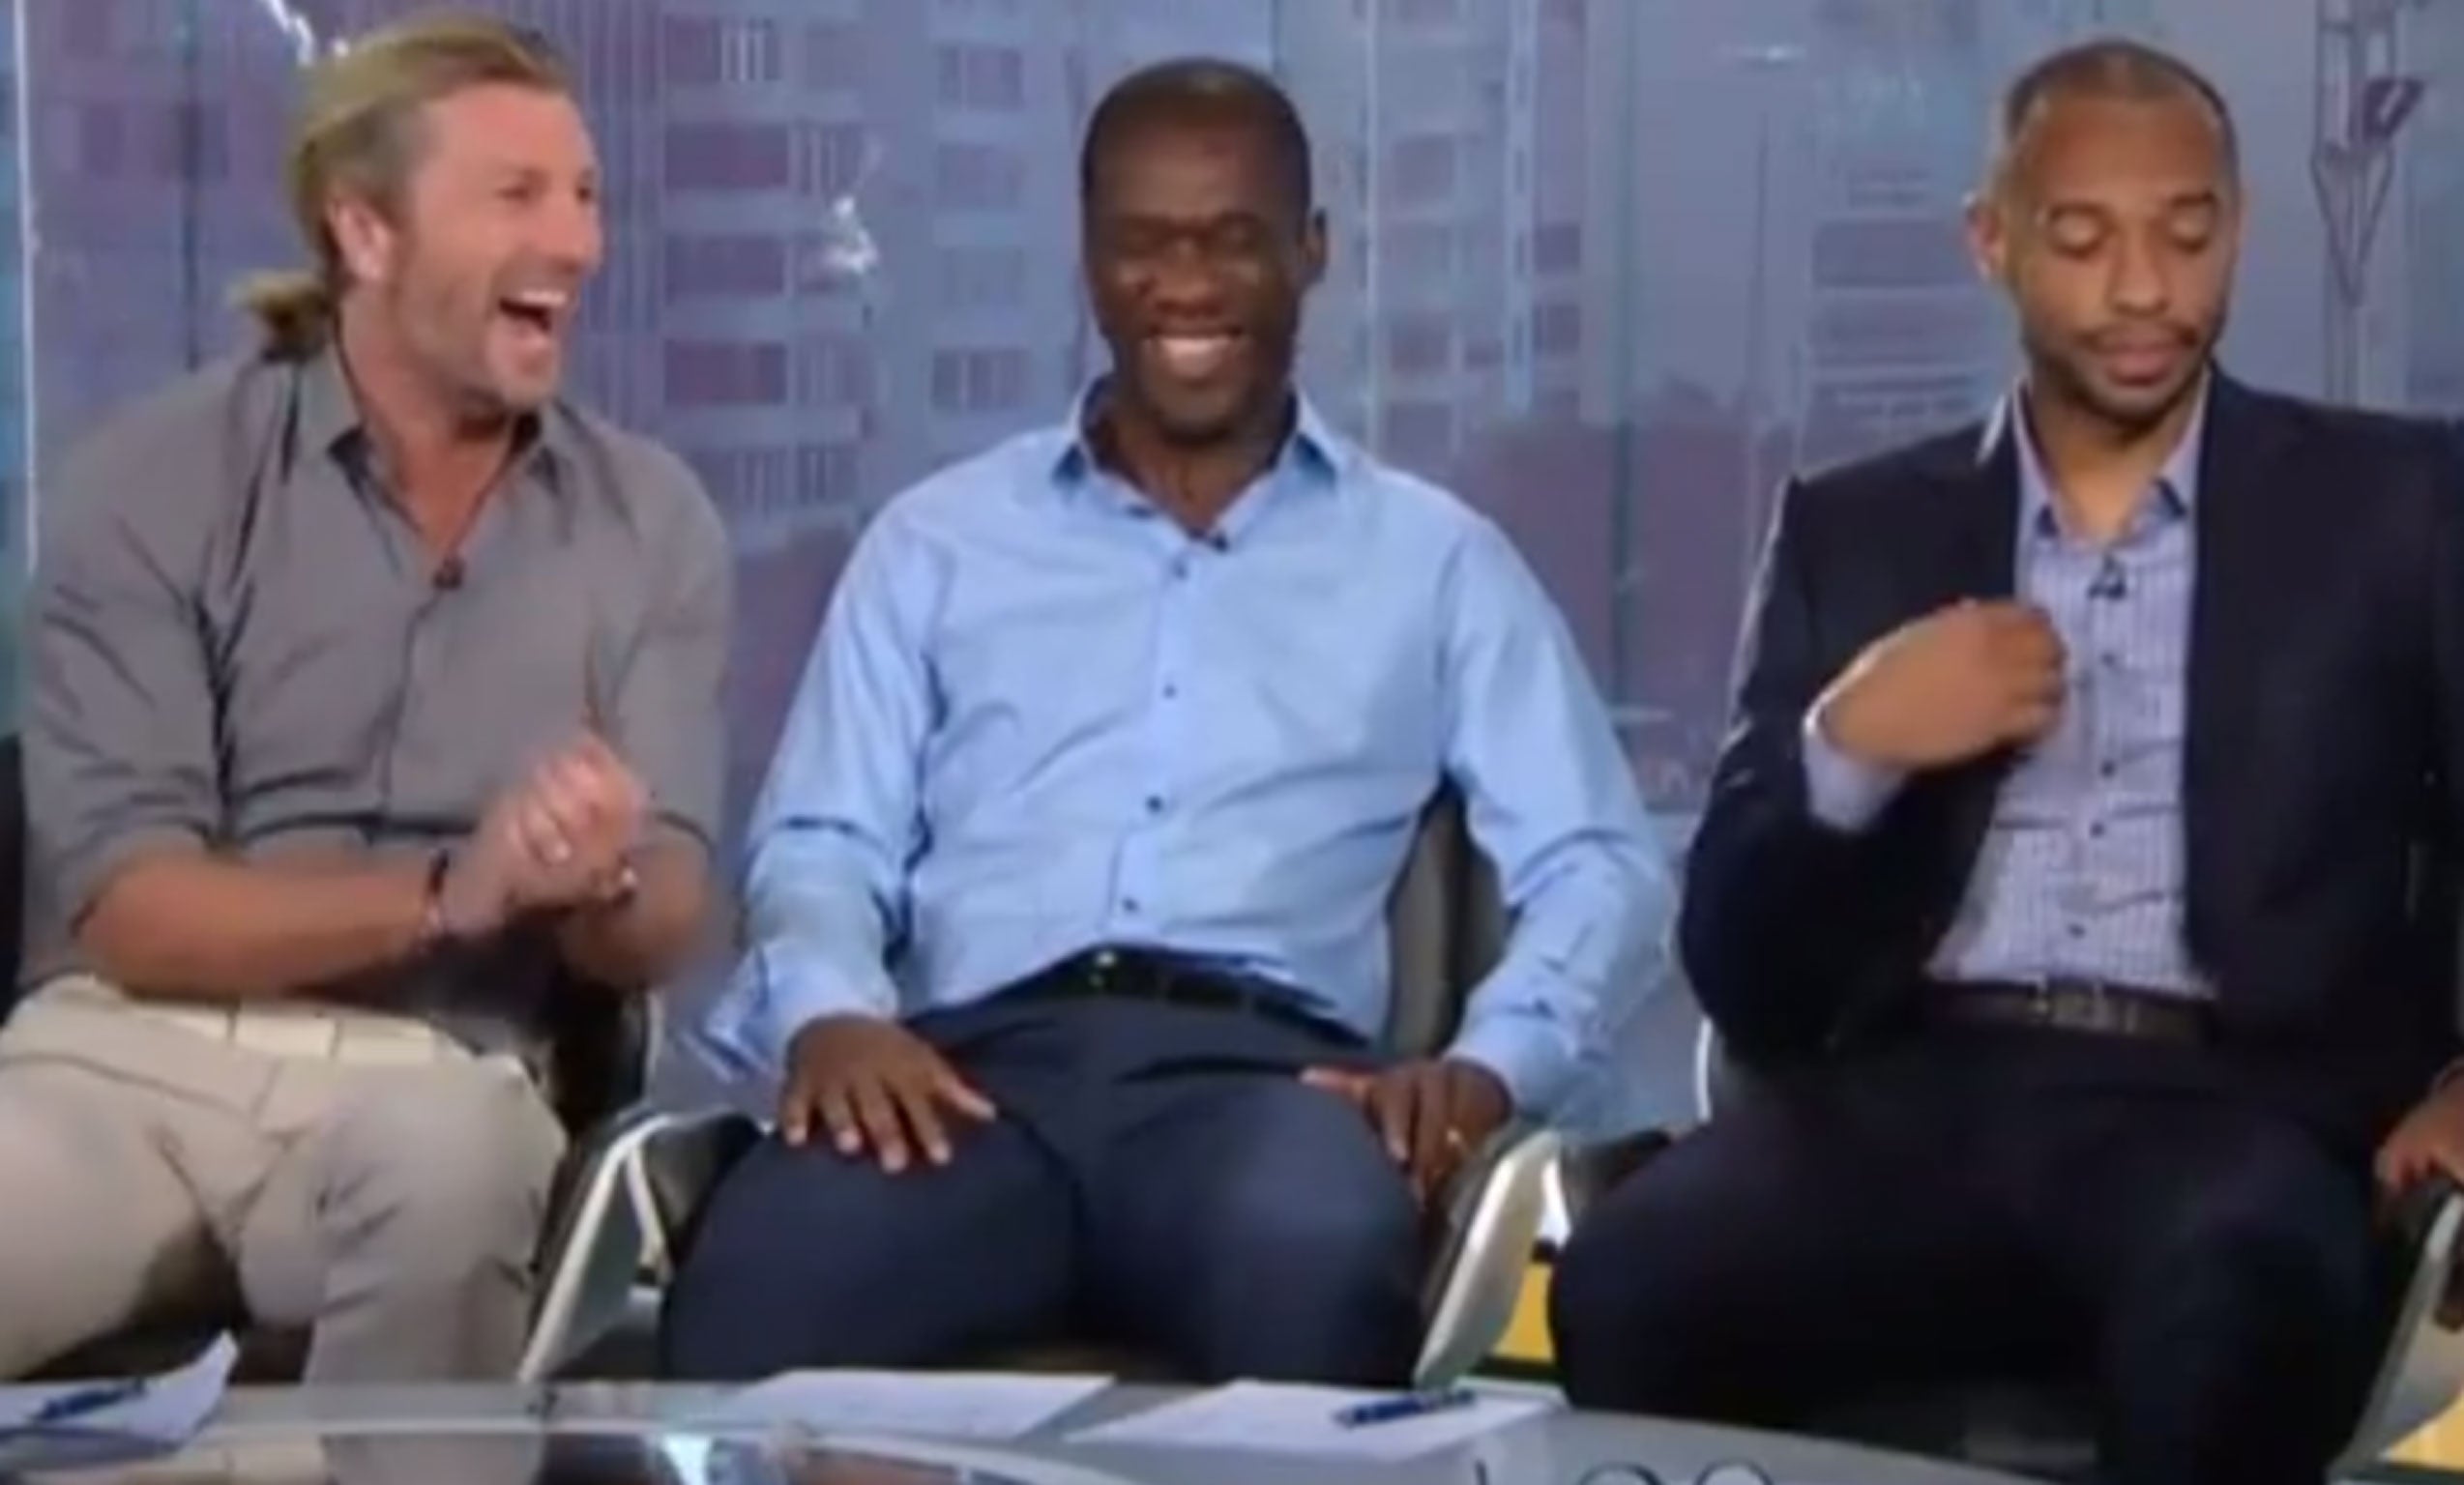 Robbie Savage was the butt of a Thierry Henry put down in the BBC World Cup studio